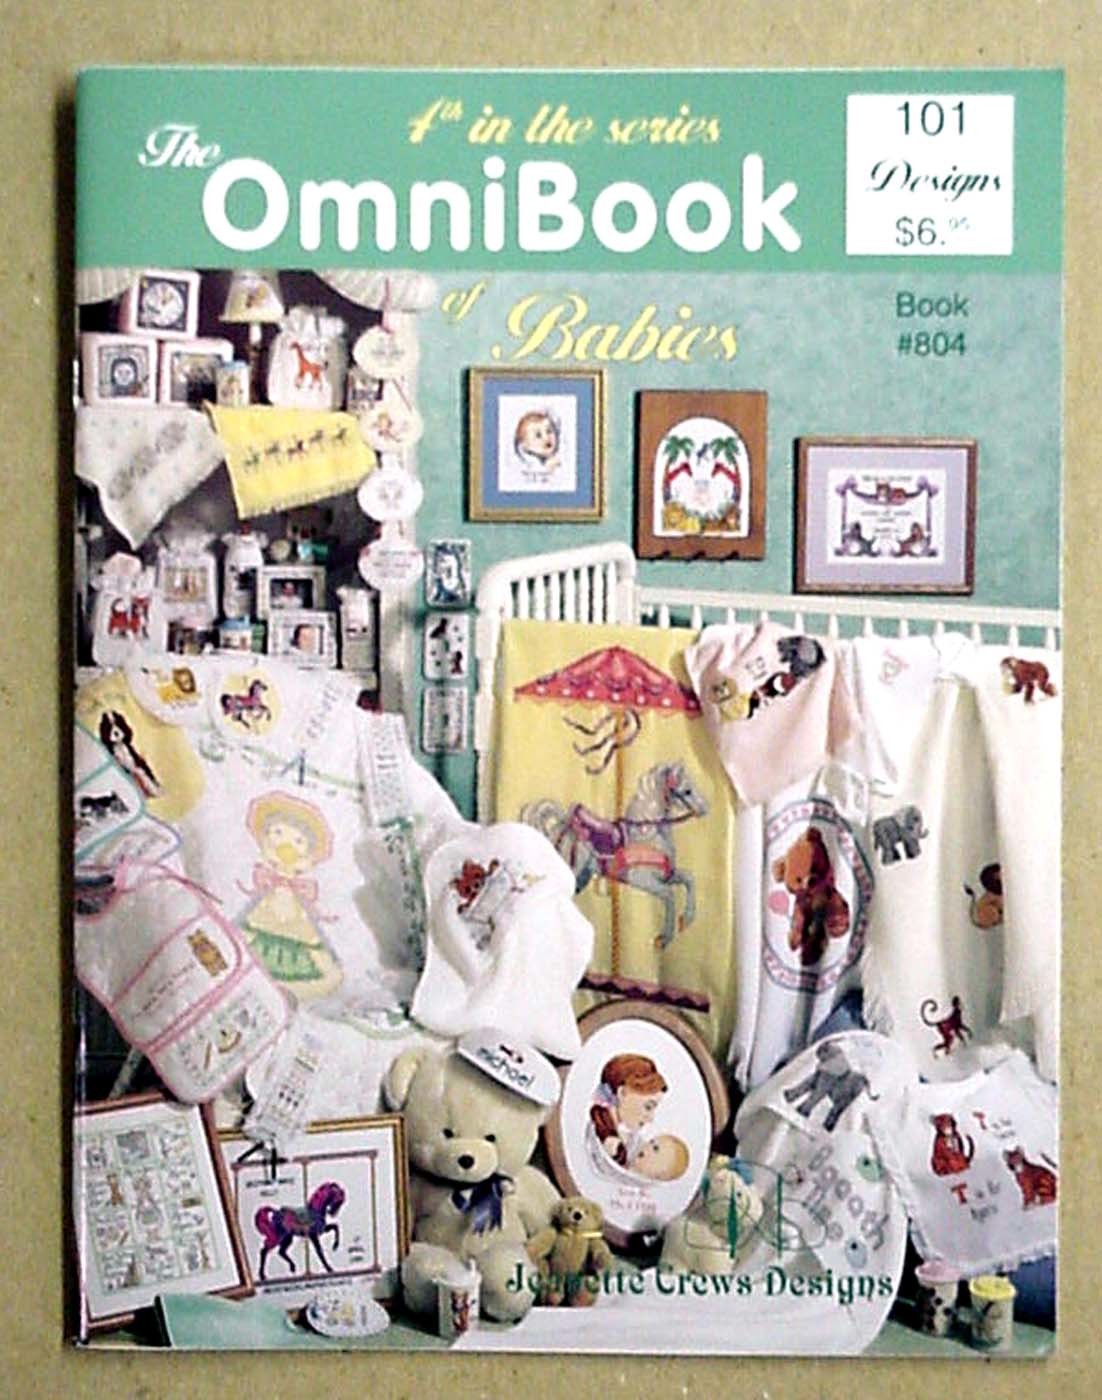 OmniBook #4 by Jeanette Crews Designs (101 designs for babies) - $7.95